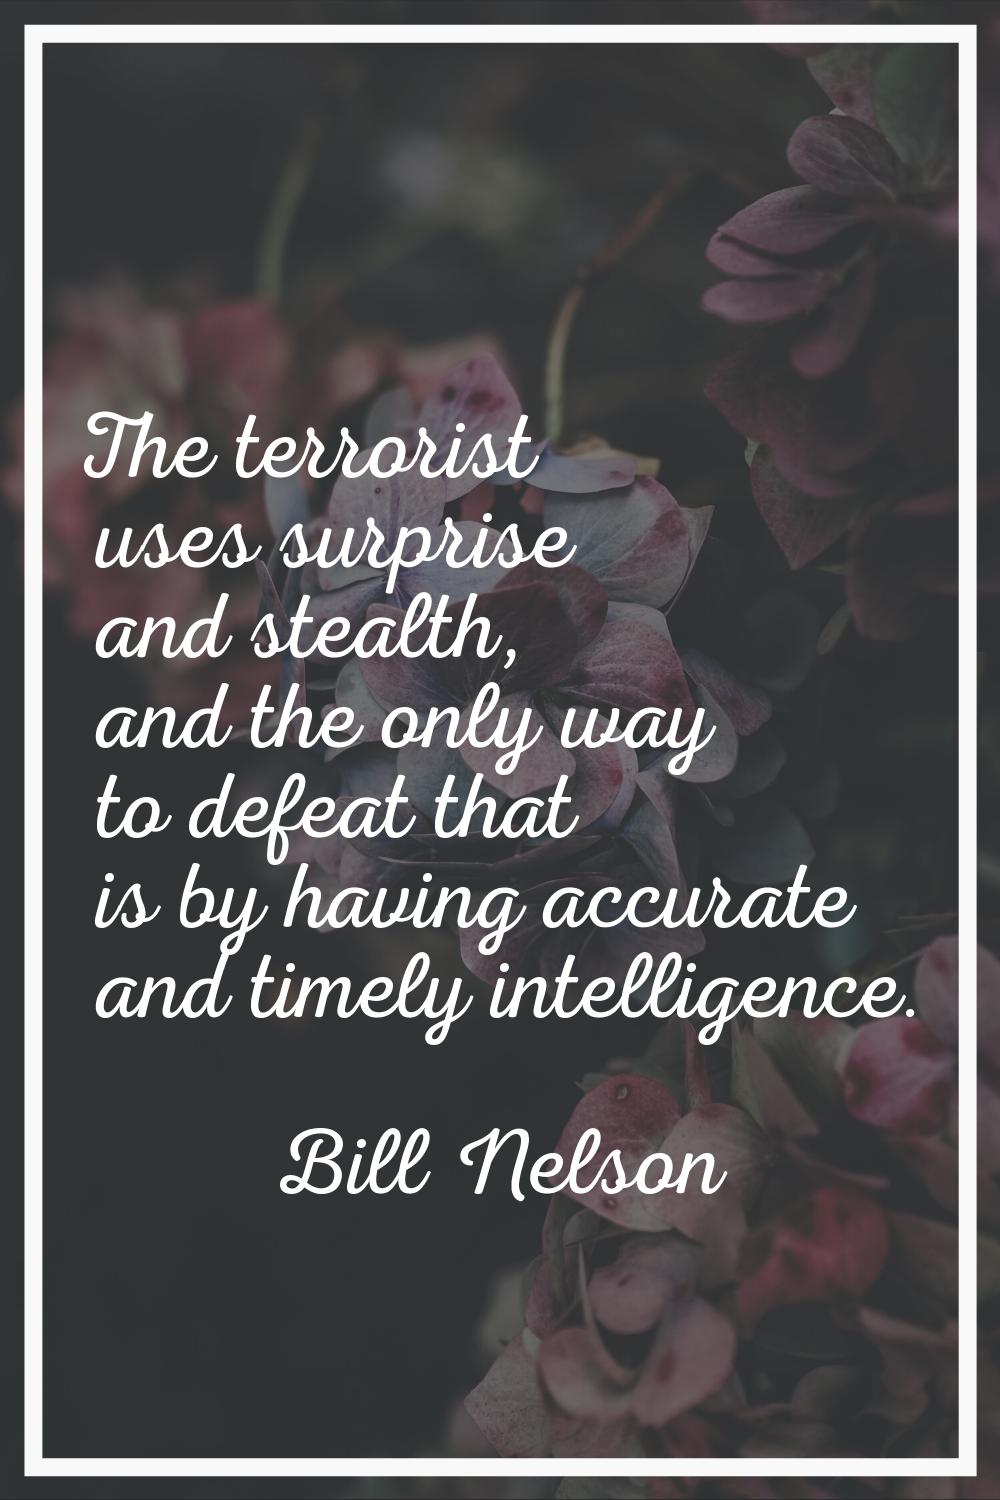 The terrorist uses surprise and stealth, and the only way to defeat that is by having accurate and 